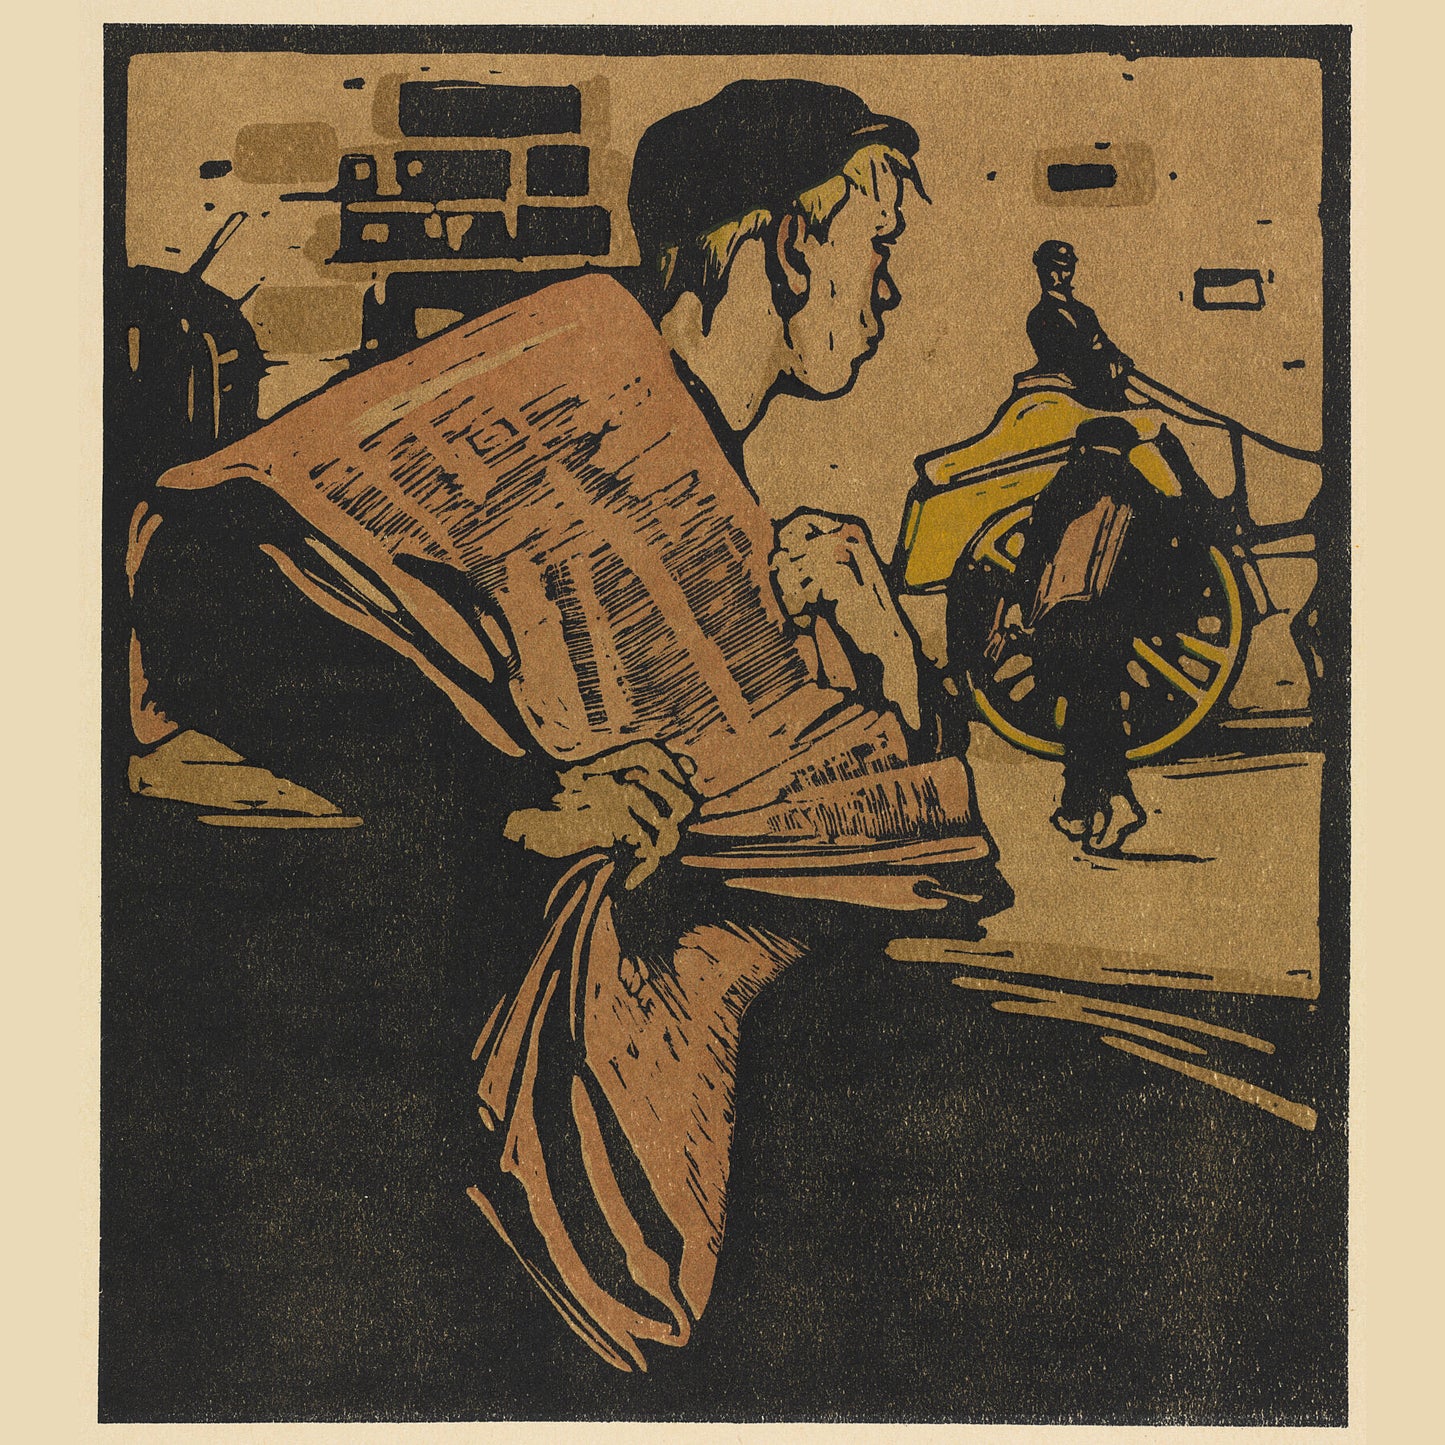 London Types : Newspaper Boy by William Nicholson - 1898.  Printmaker William Nicholson worked in partnership with his brother-in-law James Pryde, under the pseudonym the Beggarstaff Brothers.